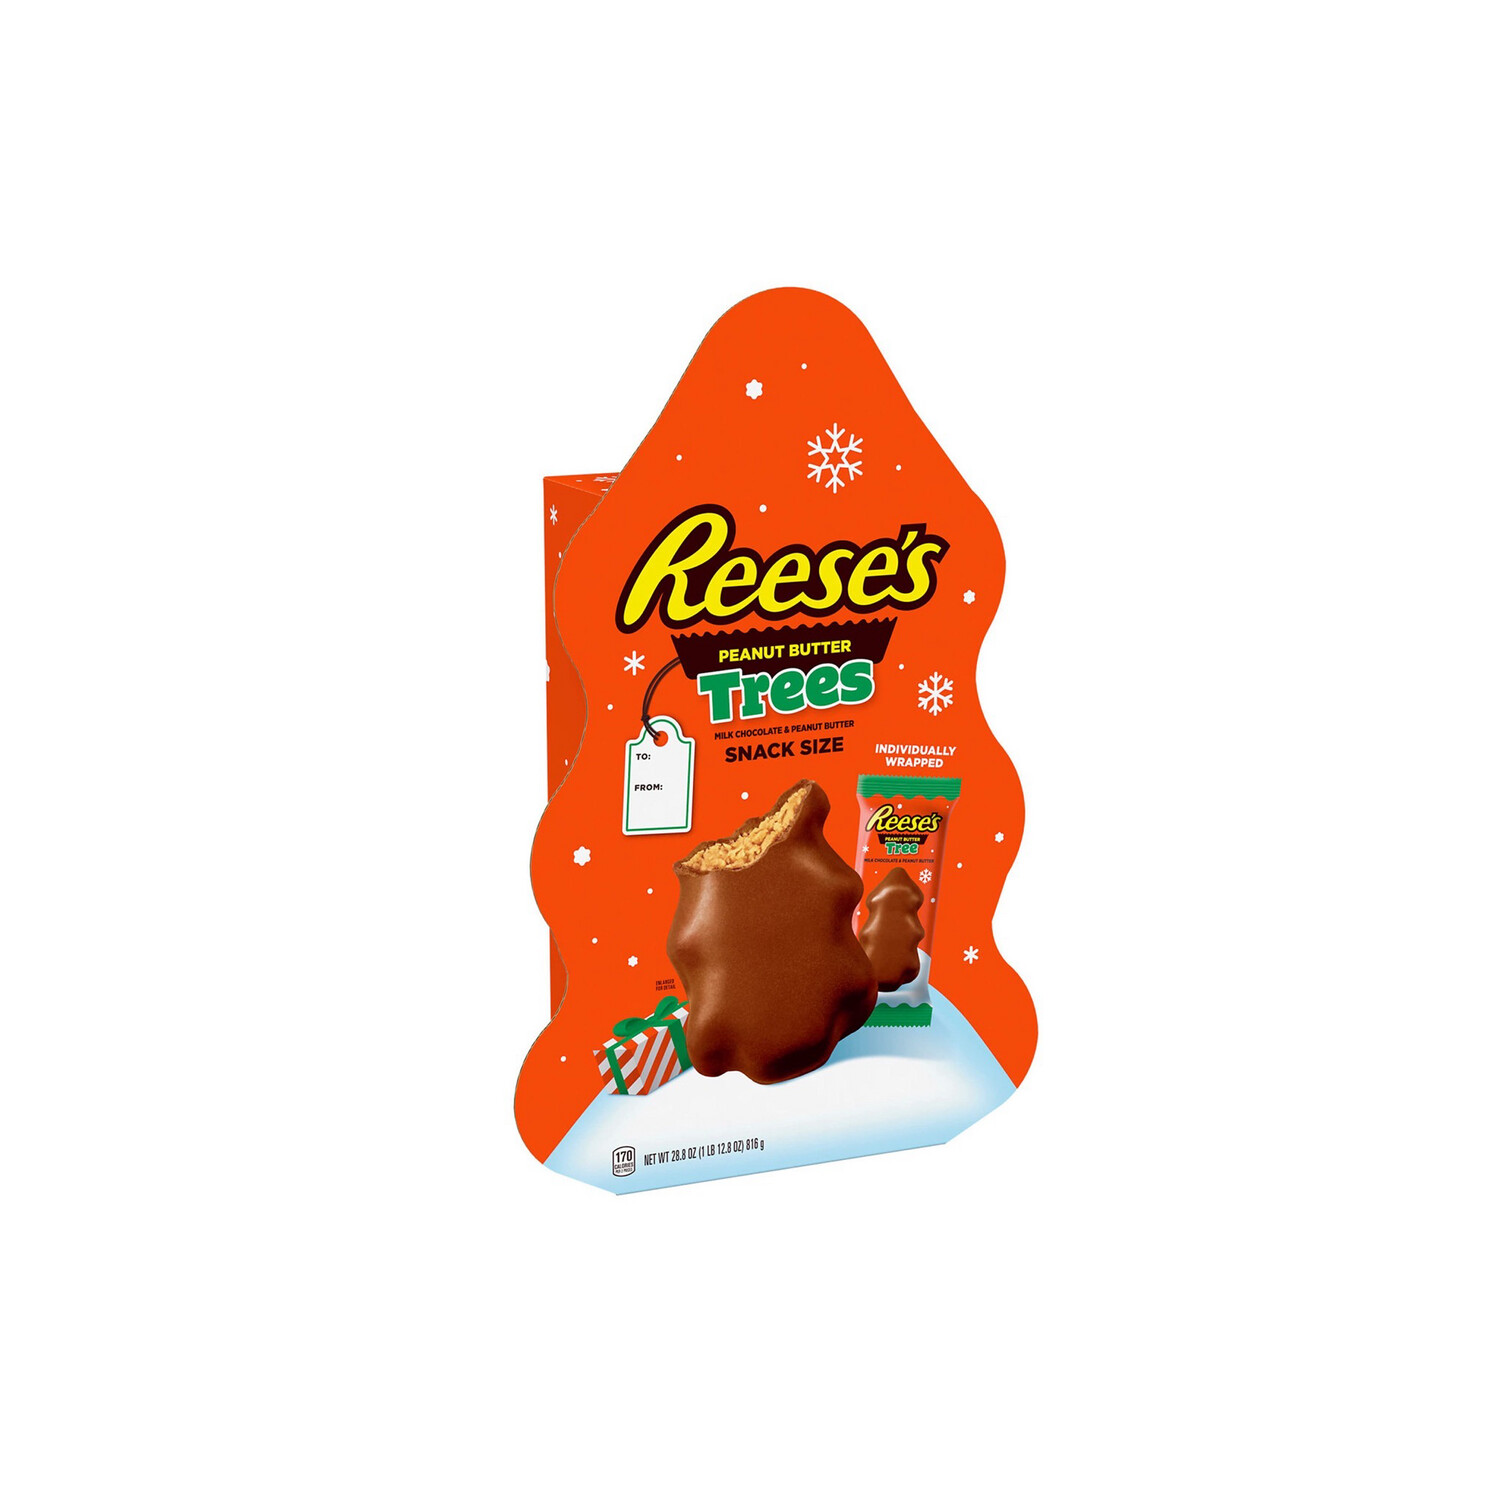 Reese’s Christmas Trees Snack Size Giant Tree Box (816g) - America